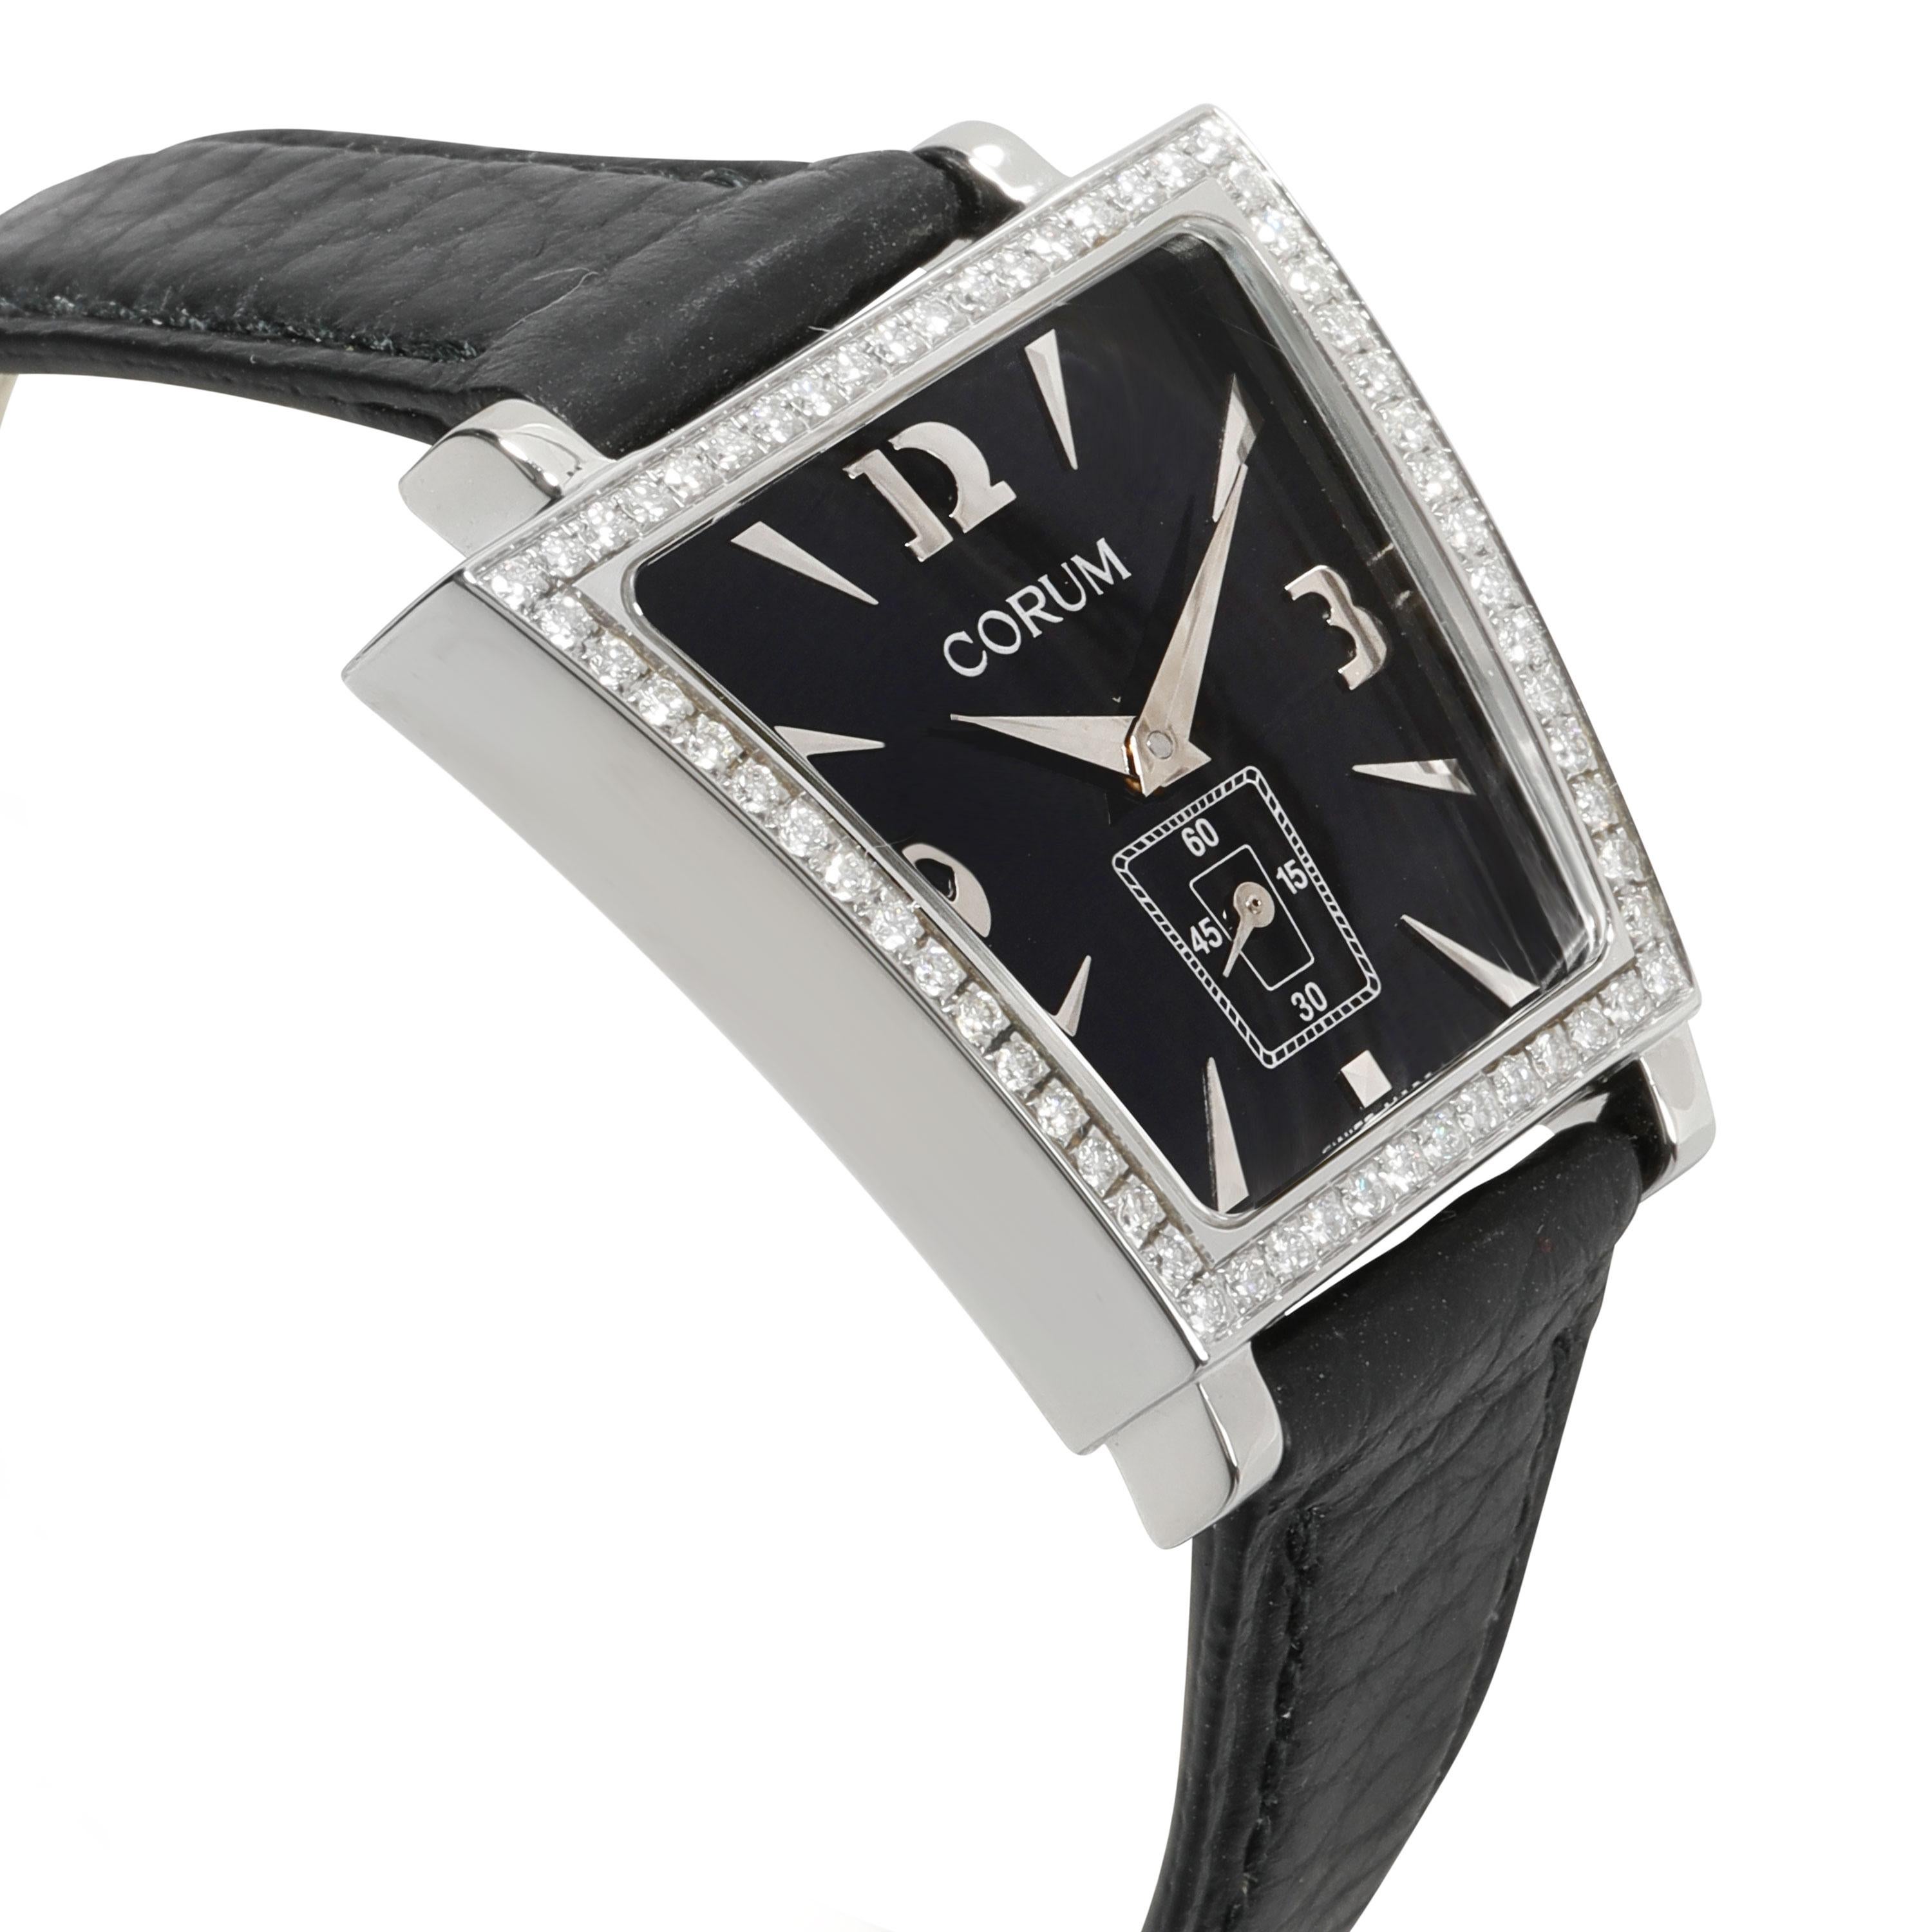 Corum Trapeze 105.404.47 Women's Watch in Stainless Steel

SKU: 108964

PRIMARY DETAILS
Brand:  Corum
Model: Trapeze
Country of Origin: Switzerland
Movement Type: Quartz: Battery
Year Manufactured: 
Year of Manufacture: 2000-2009
Condition: In